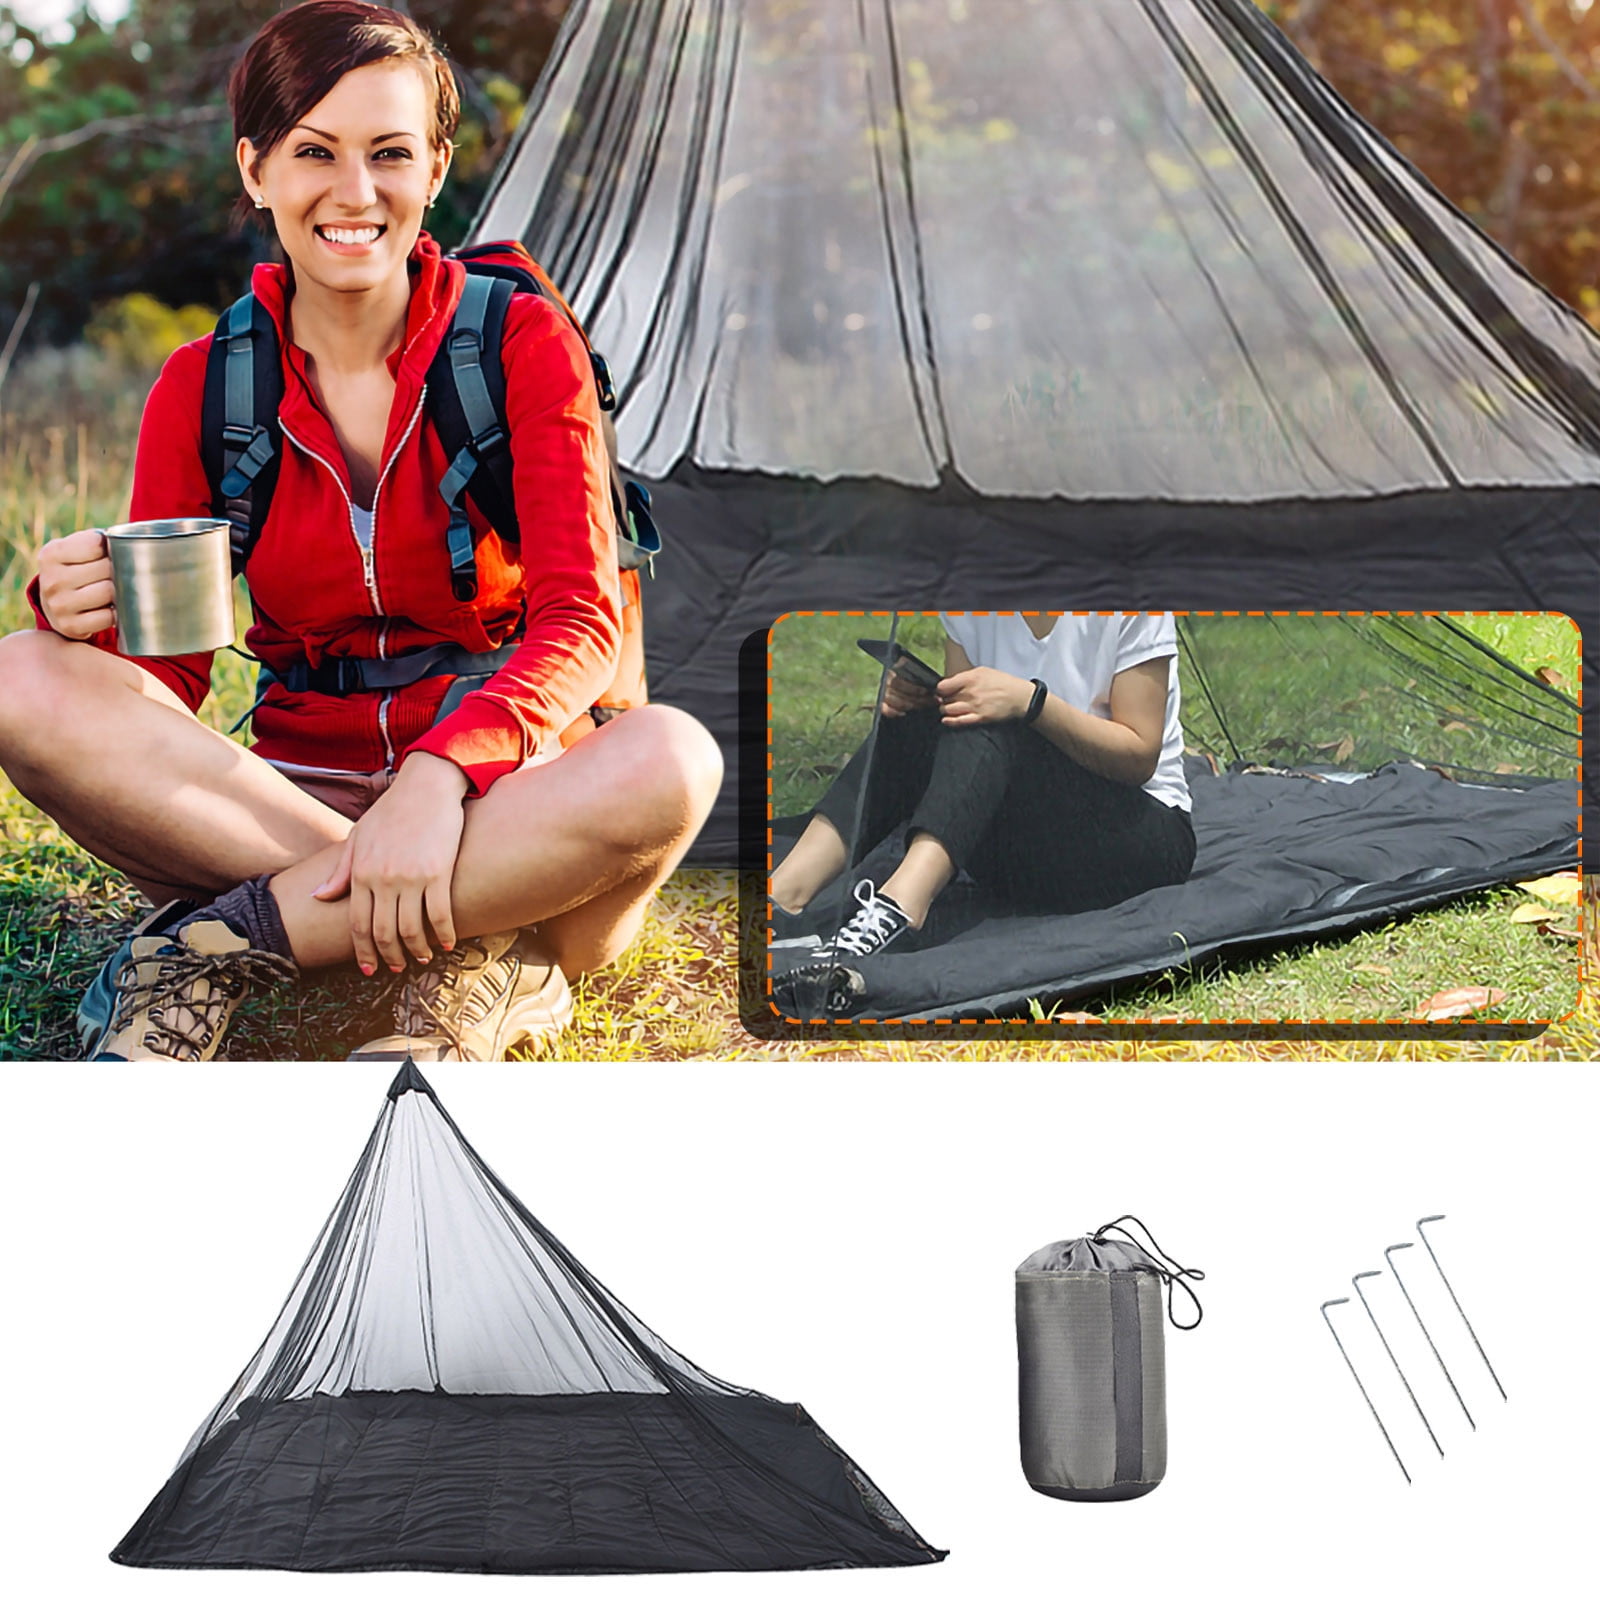 Outdoor Person Travel Camping Portable Foldable Mesh Mosquito Net